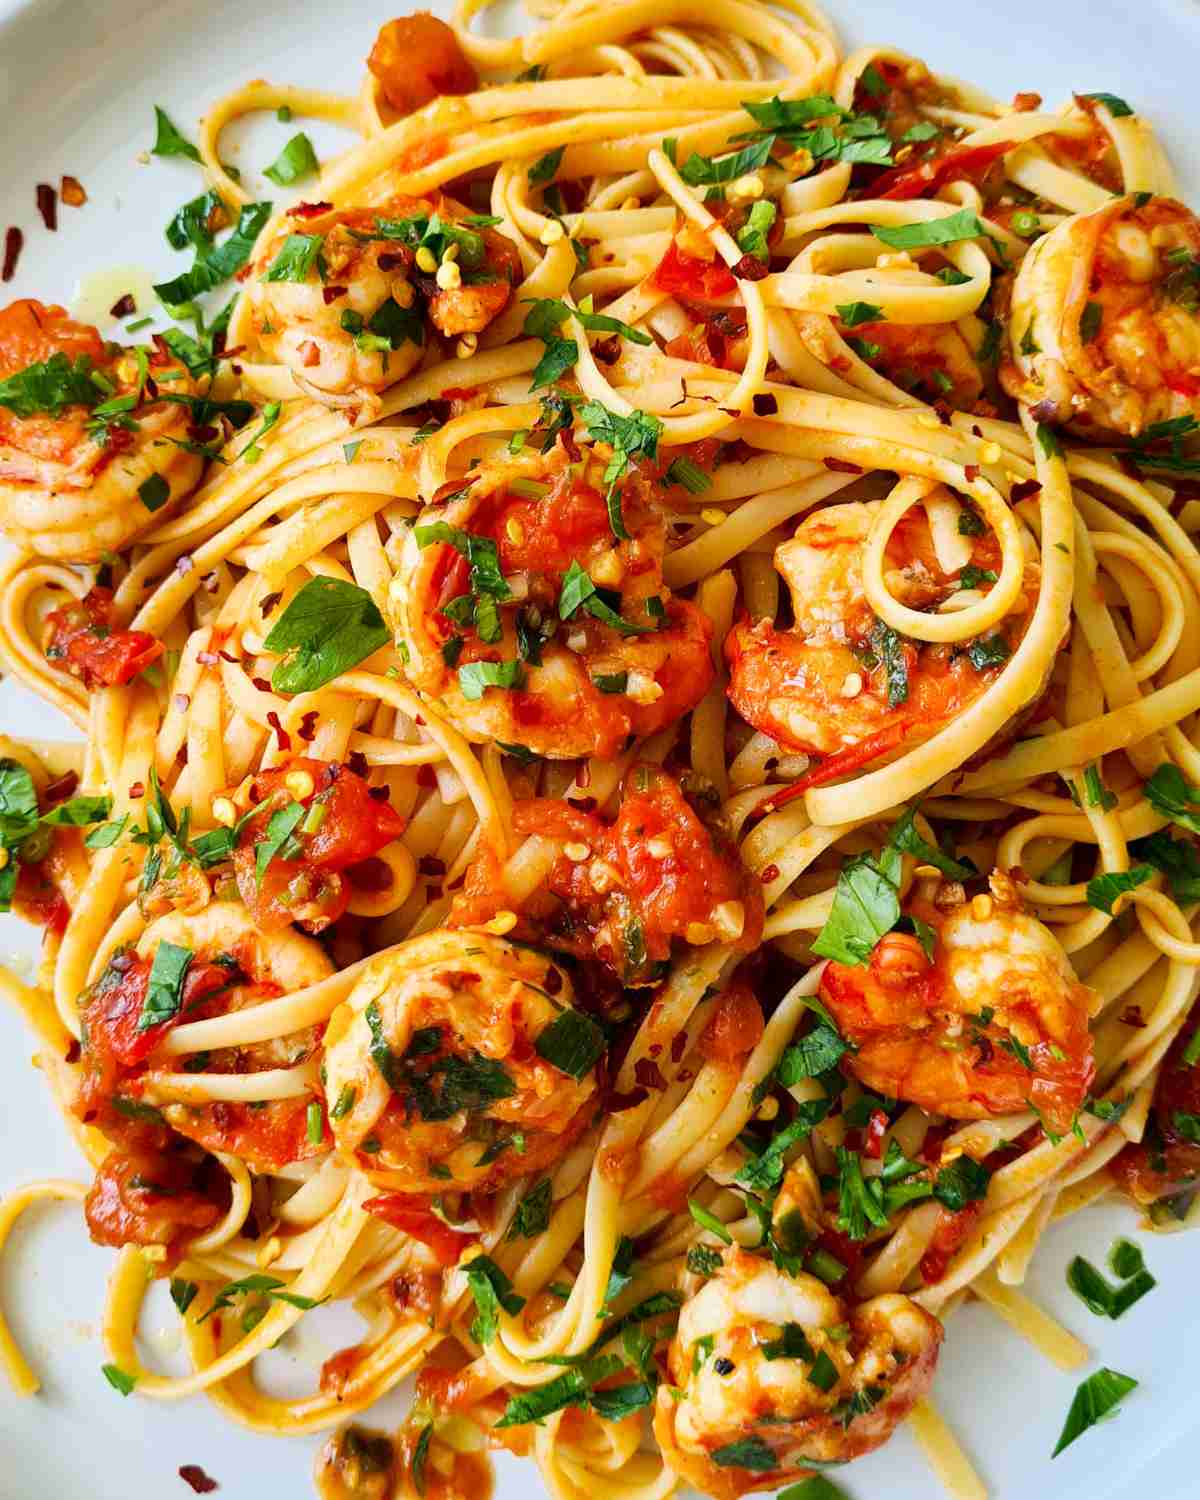 A plate of tomato sauce based prawn pasta sprinkled with chilli flakes